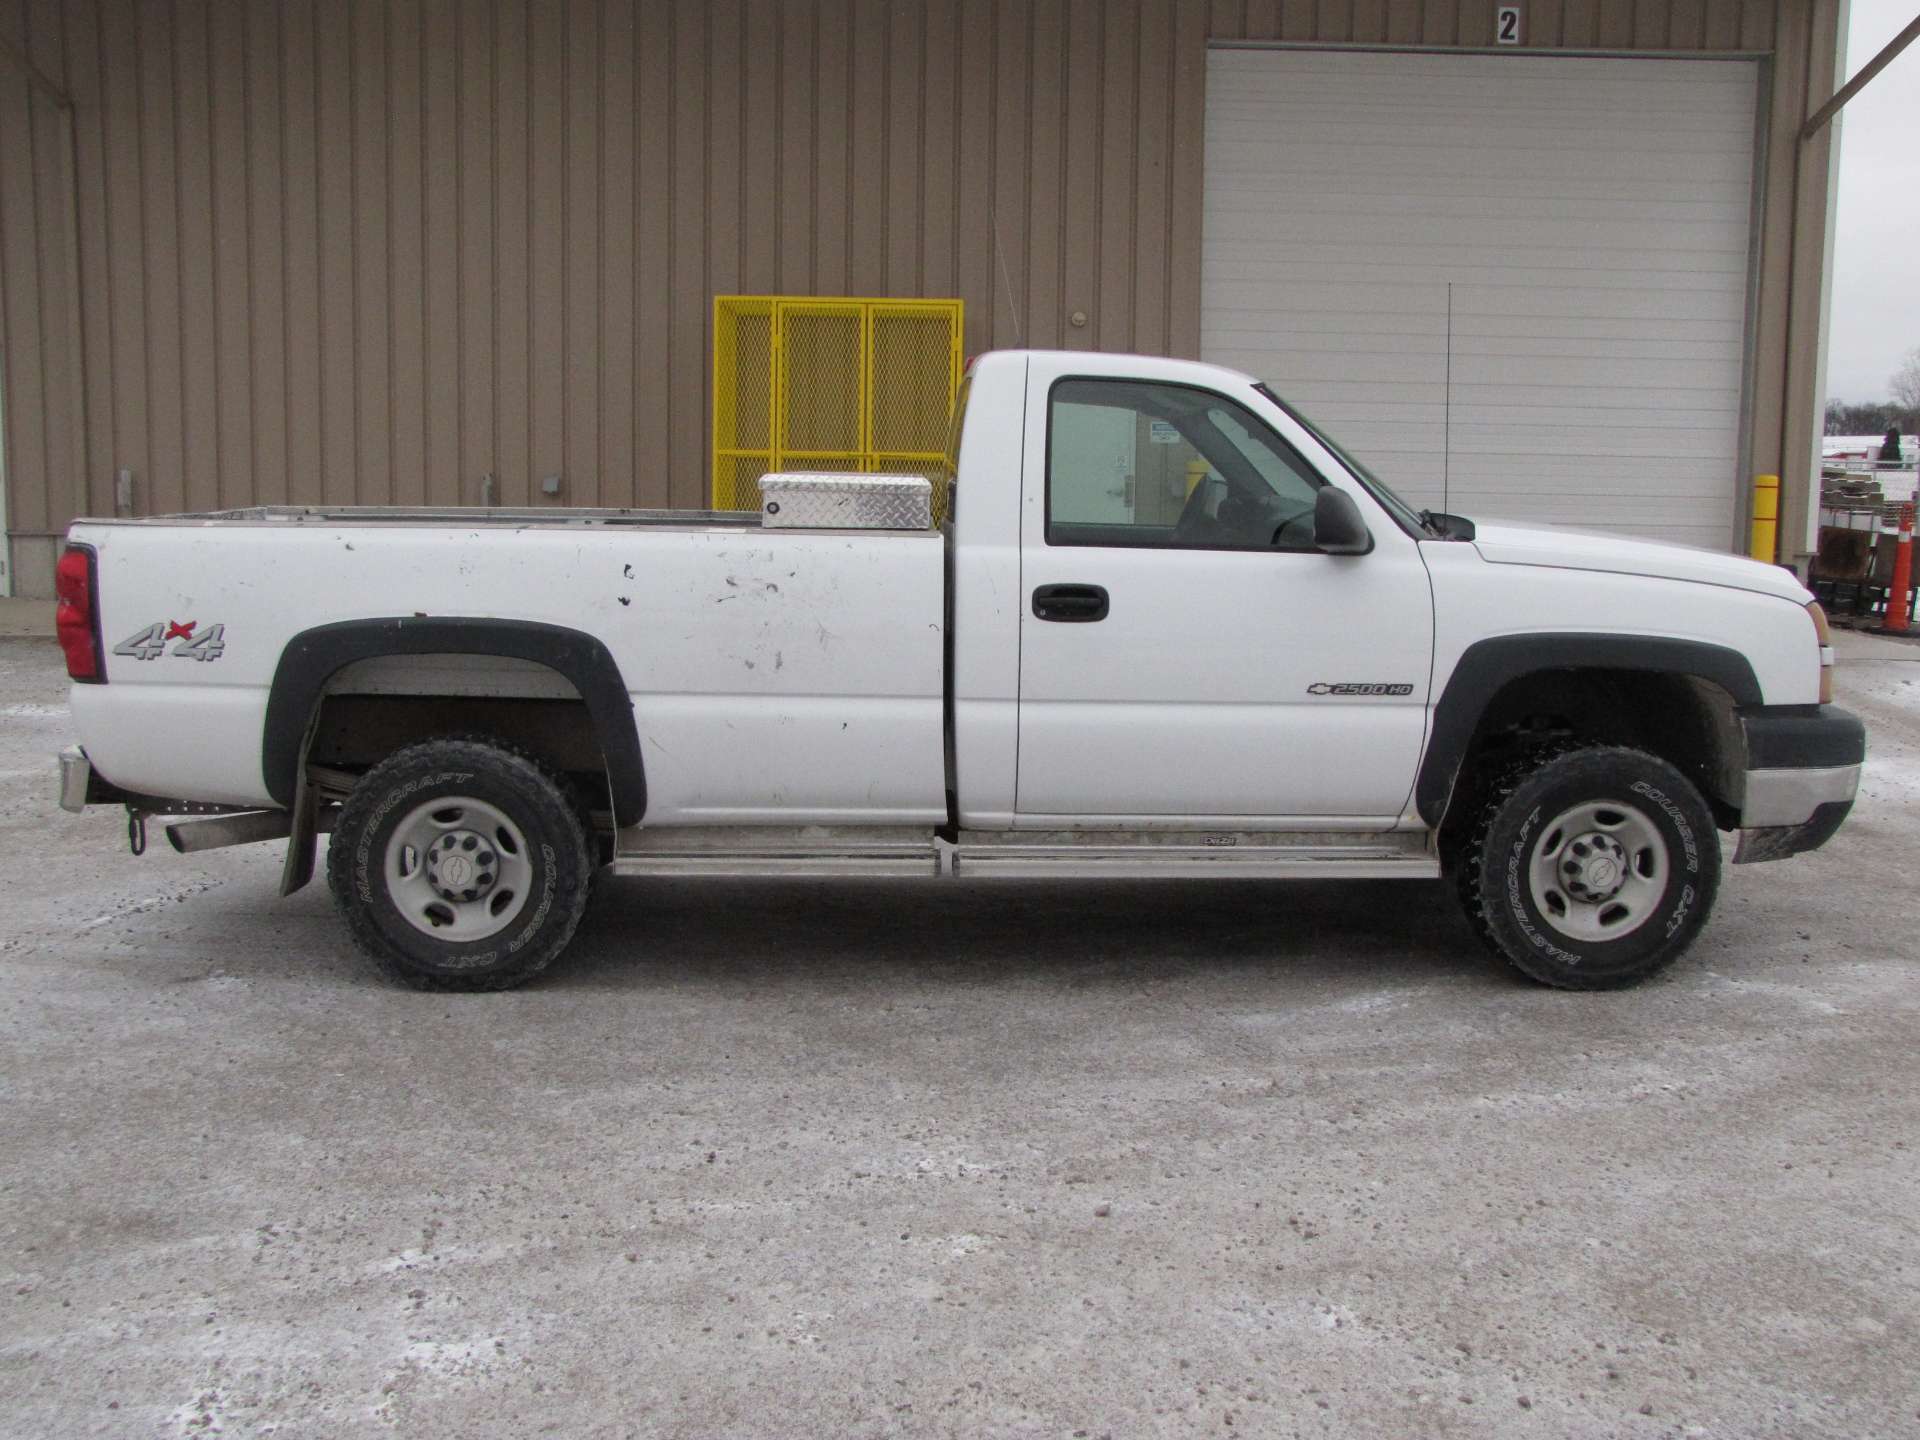 2006 Chevy 2500 HD pickup truck - Image 3 of 63